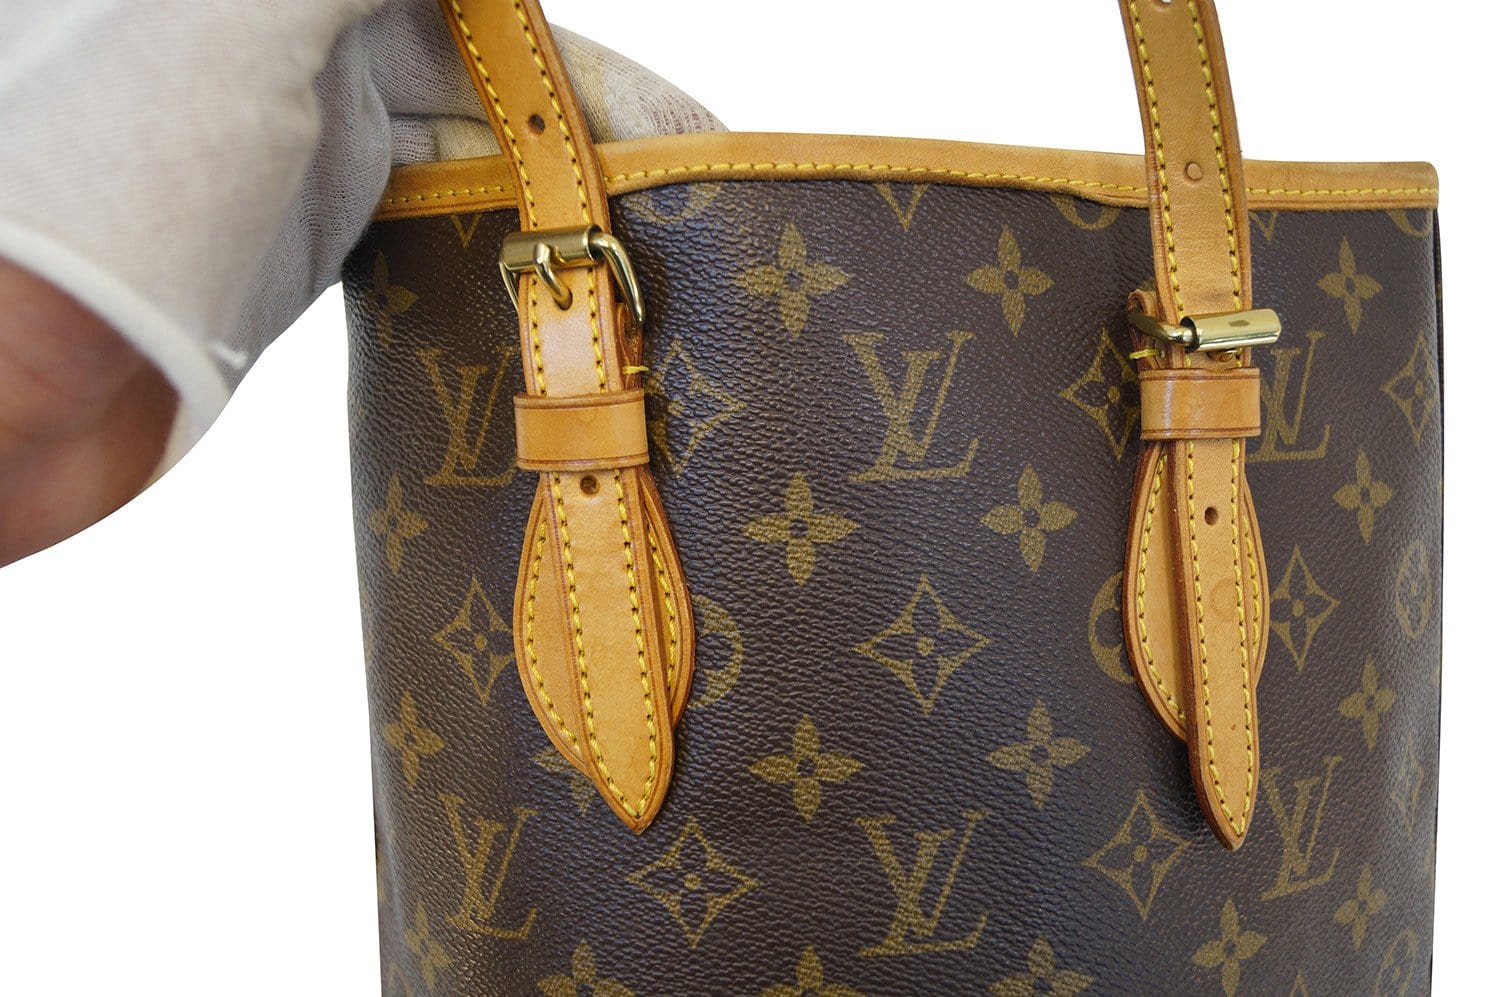 Louis Vuitton French Company Vintage Bucket Pm Shoulder Bag. Get one of the  hottest styles of the season! The Louis Vuitton F…